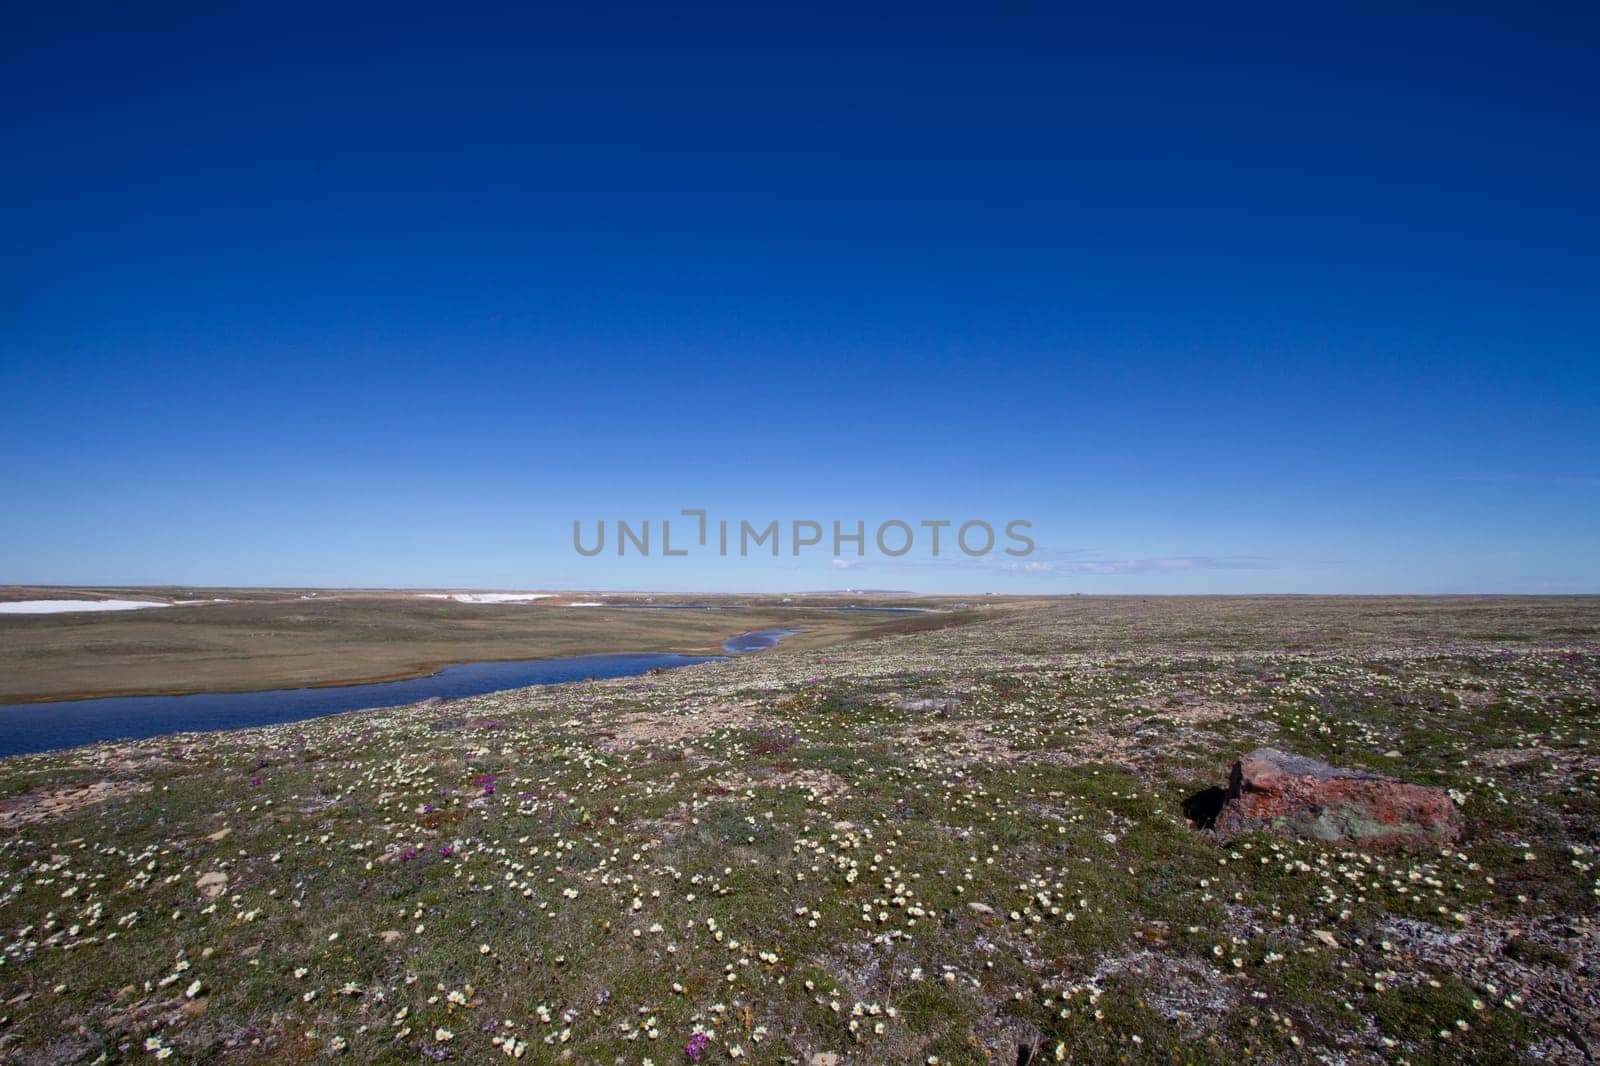 Arctic landscape in summer time. A river with broken ice flowing along a barren tundra. Near Cambridge Bay, Nunavut, Canada